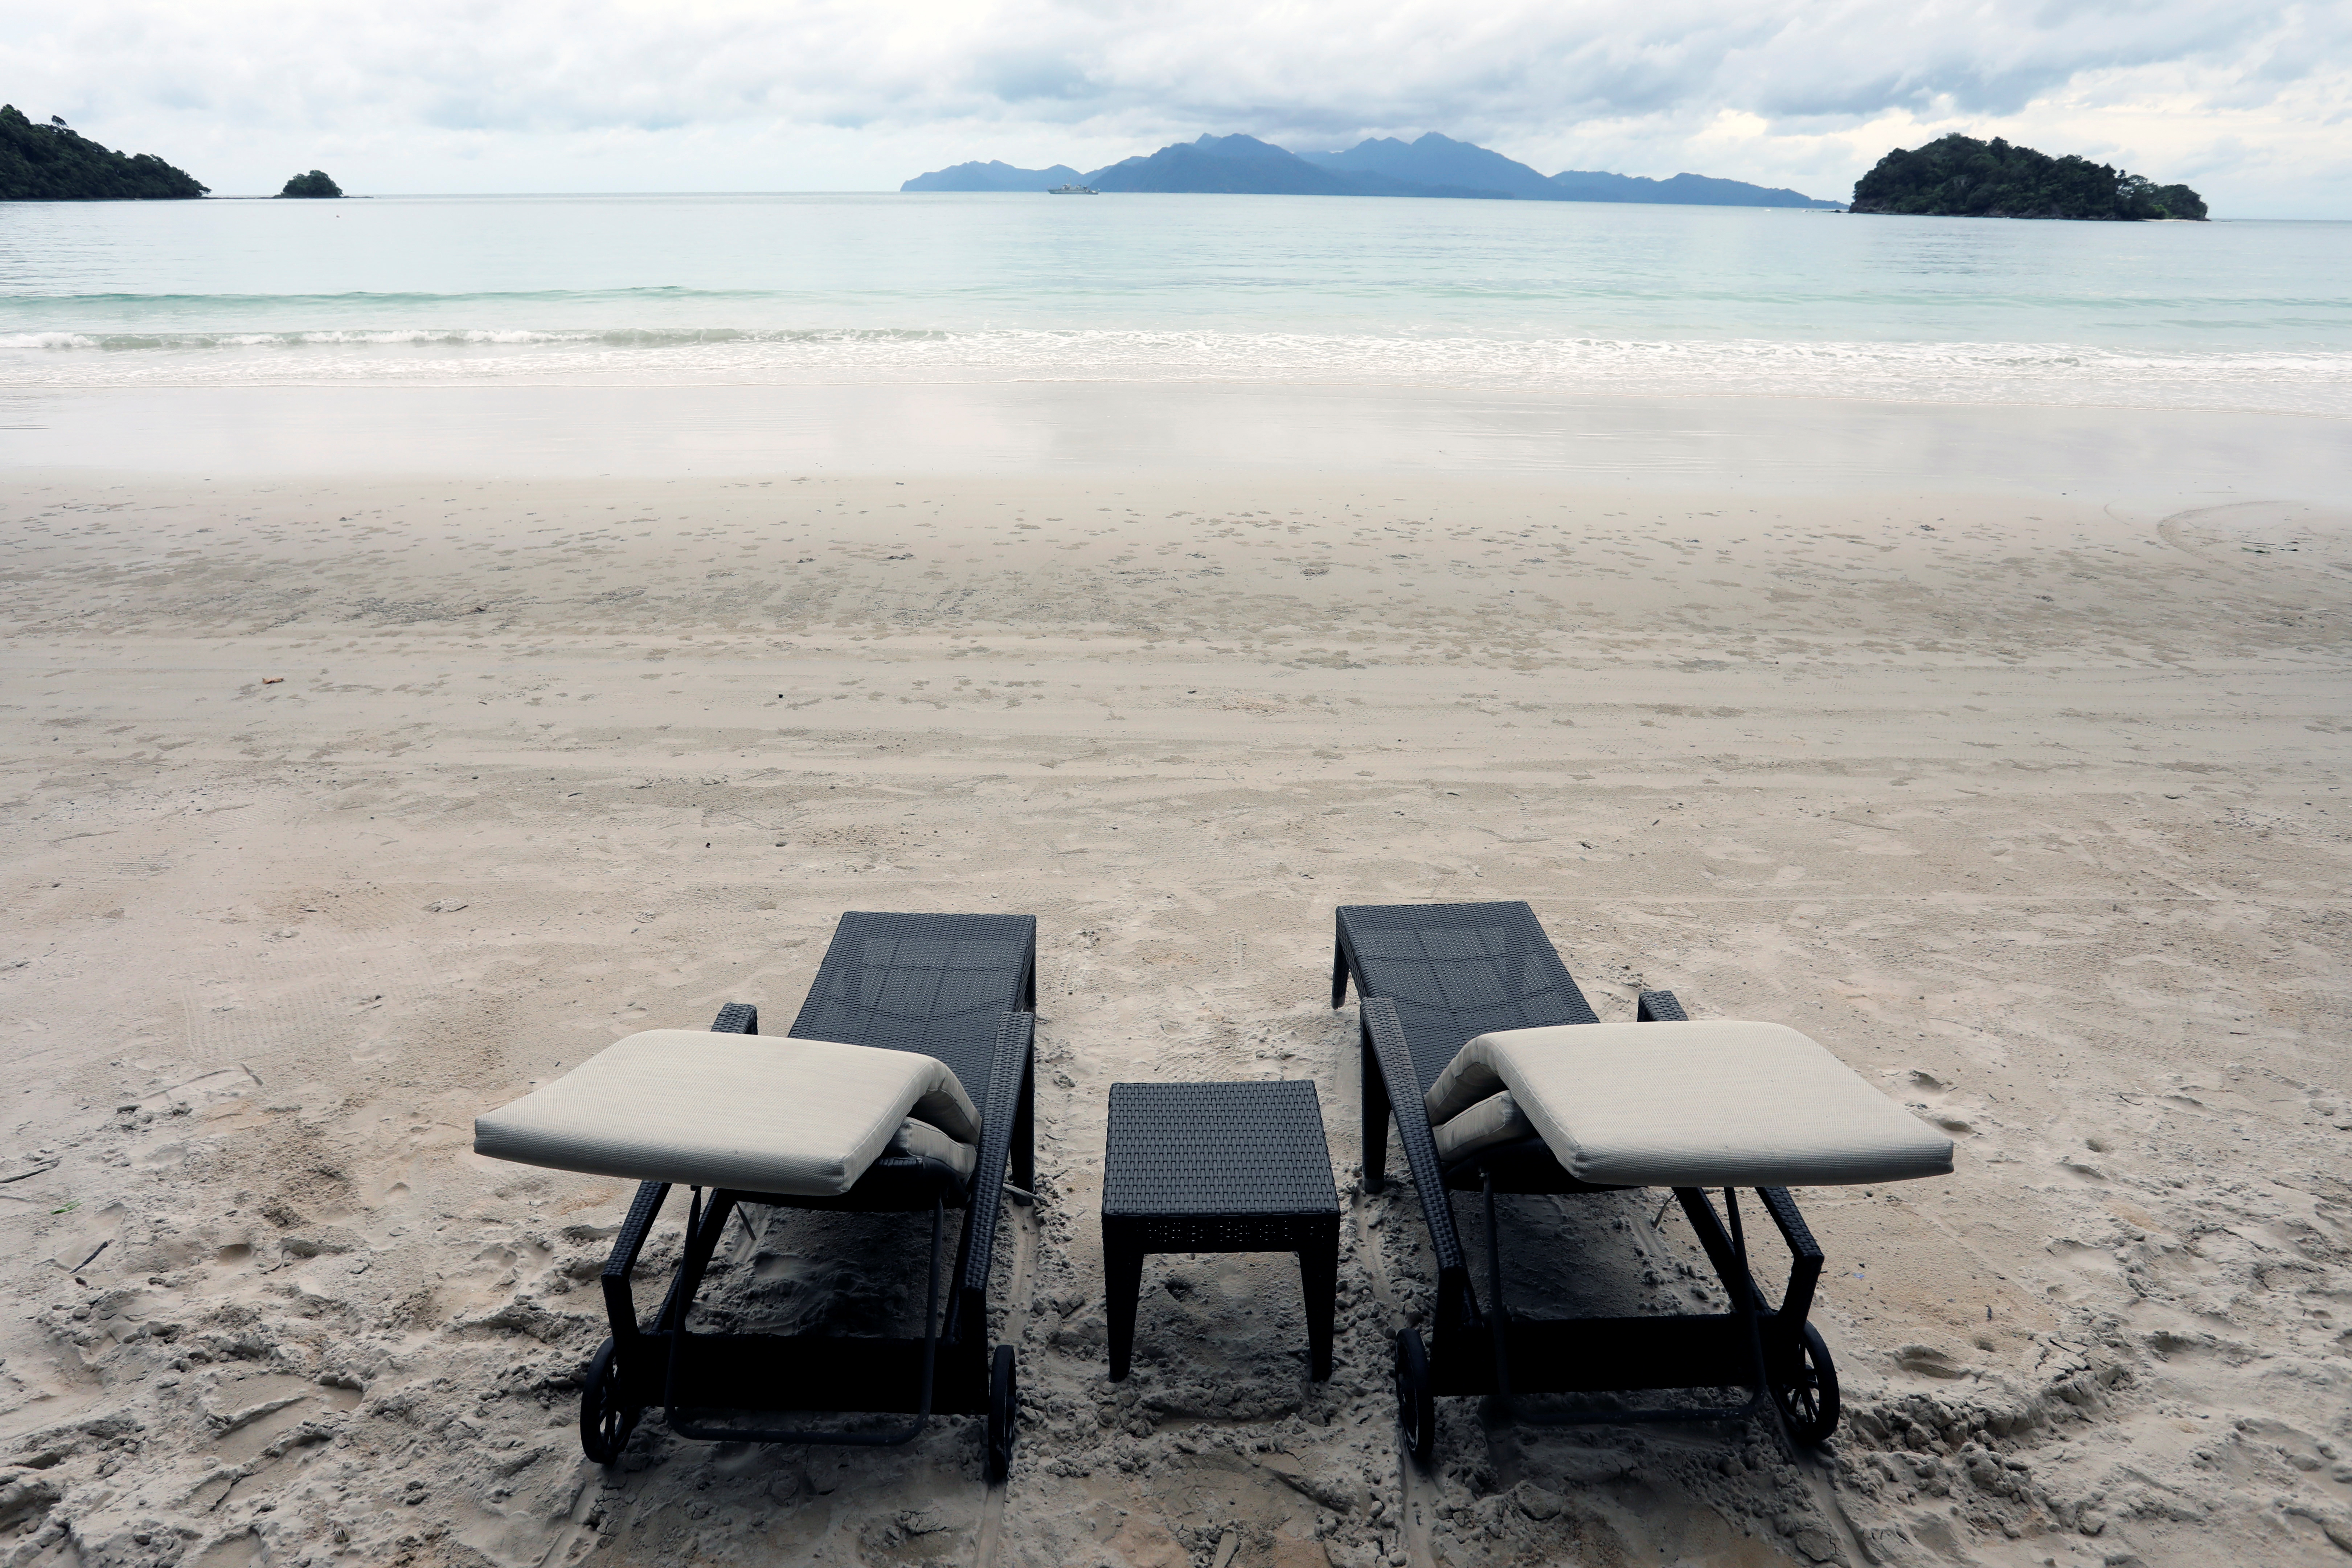 Empty chairs are seen at The Datai Langkawi resort beach in Langkawi